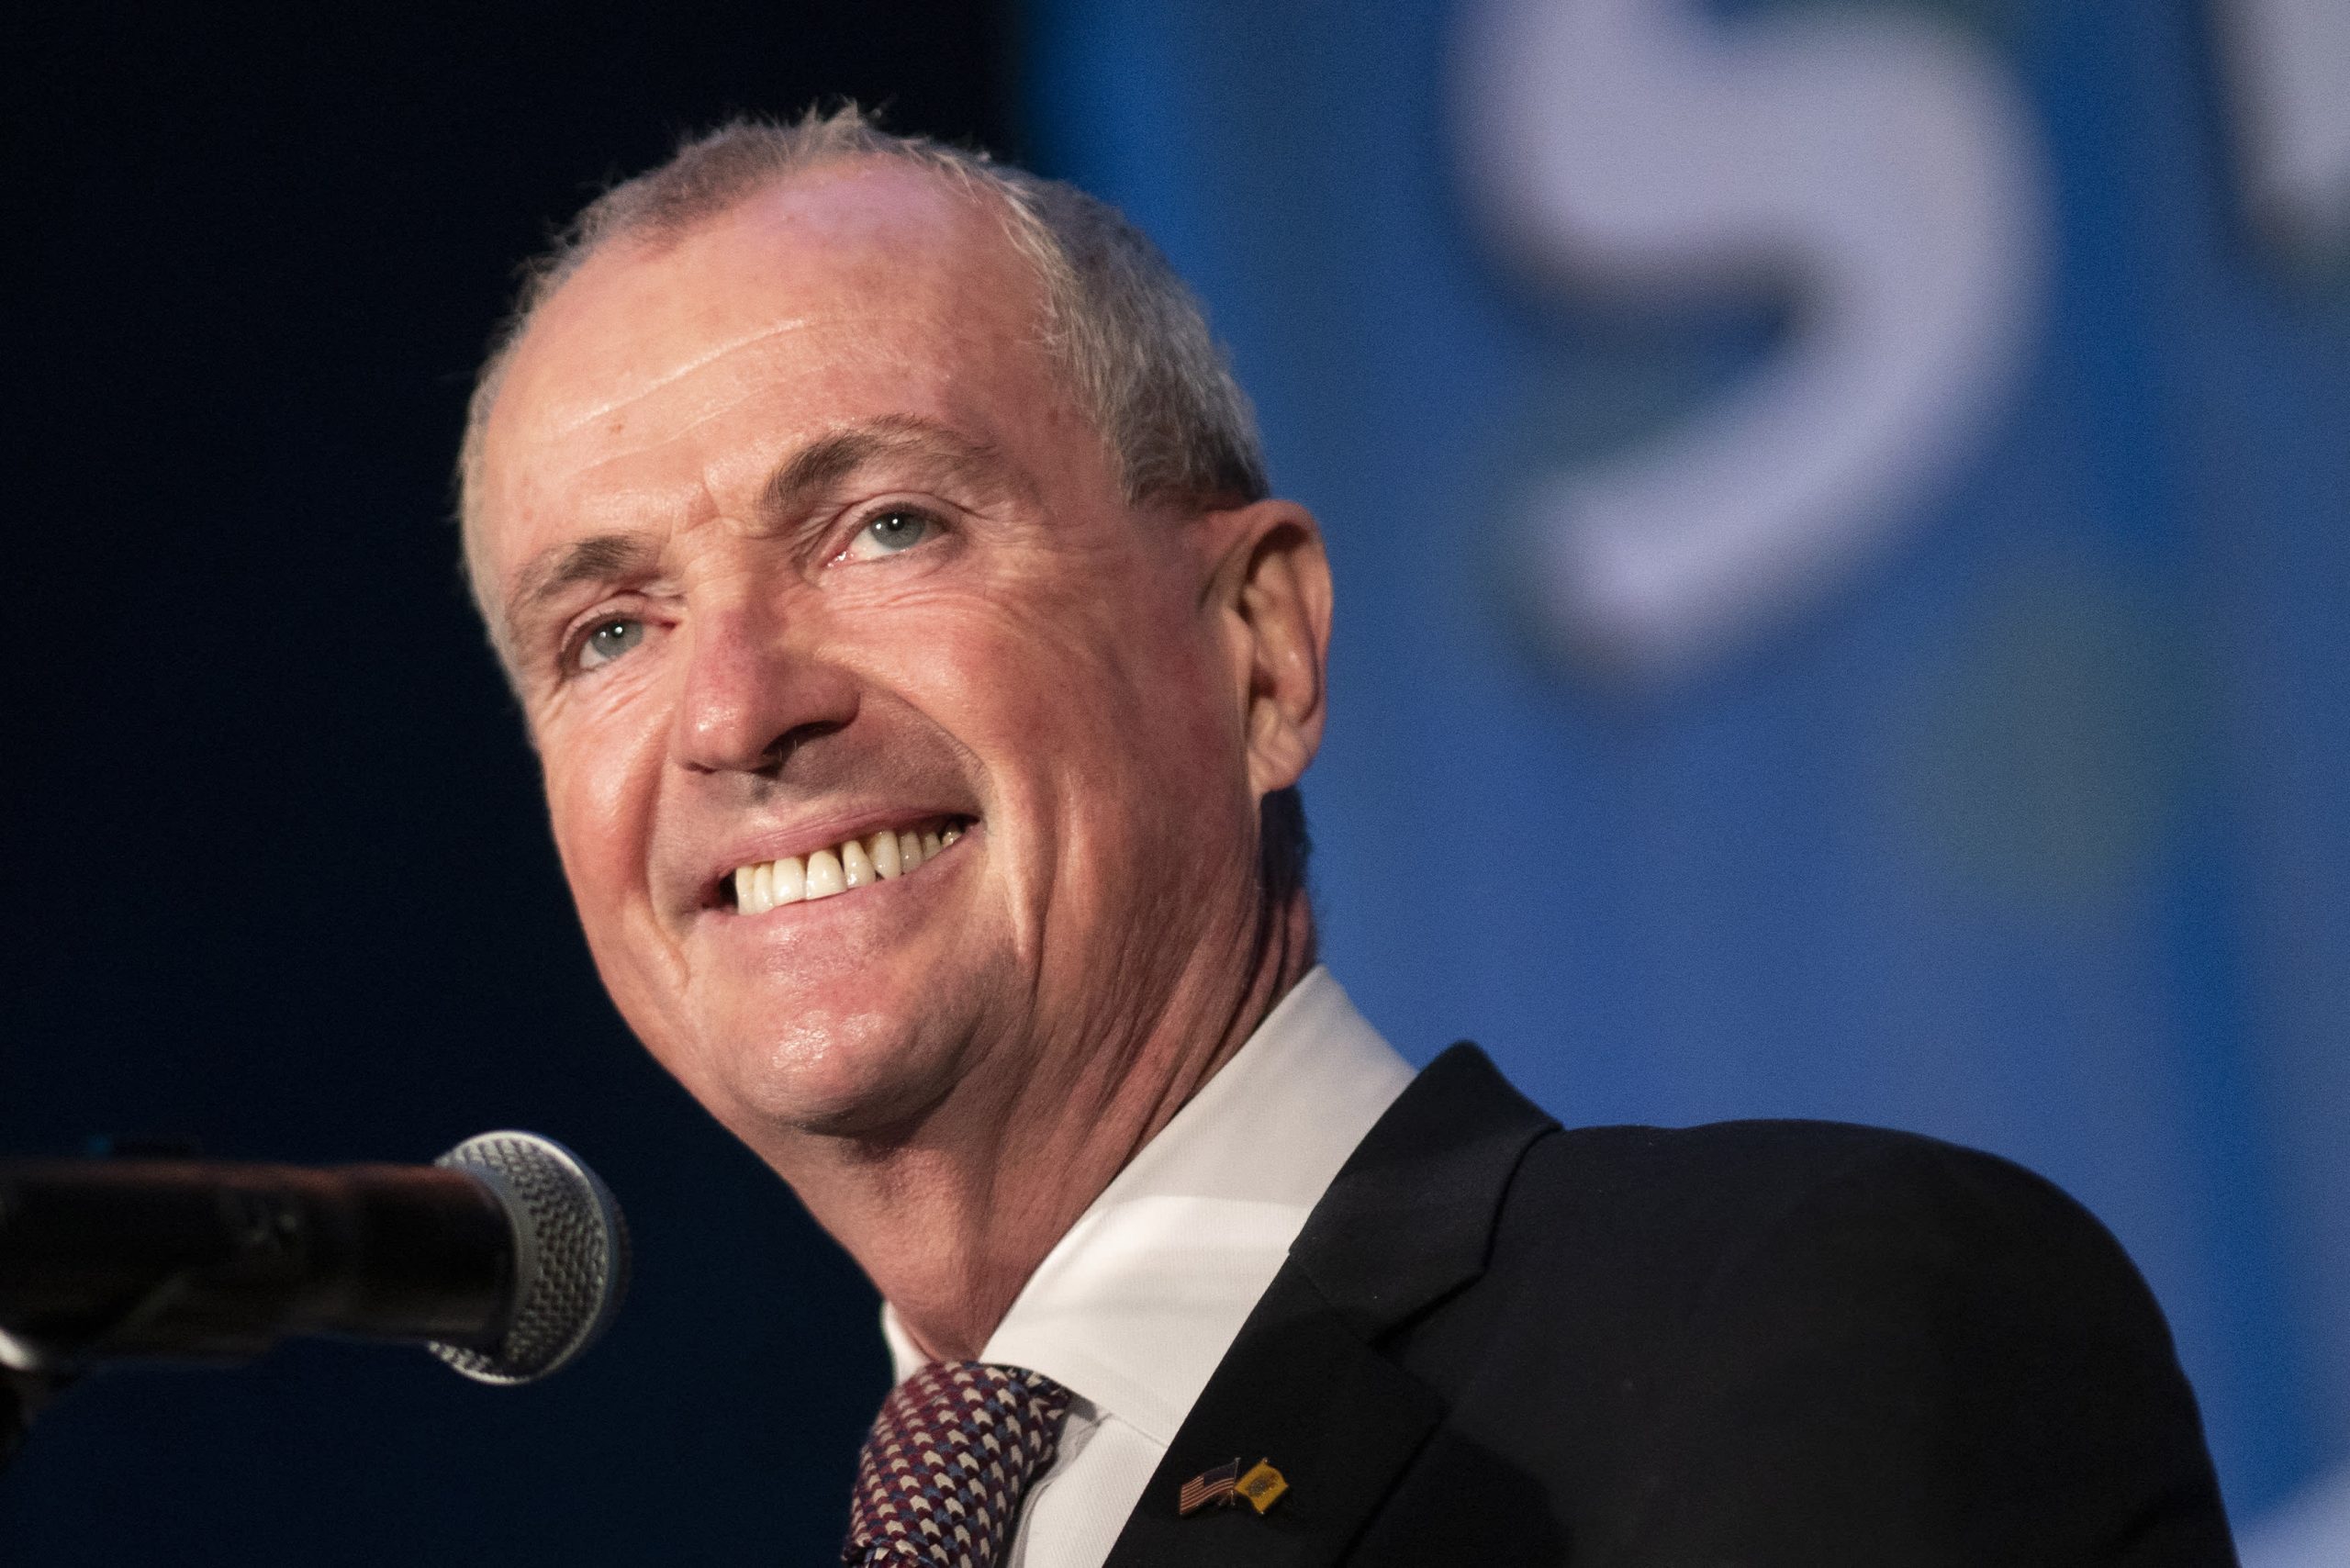 New Jersey governor floats property tax relief for homeowners, renters